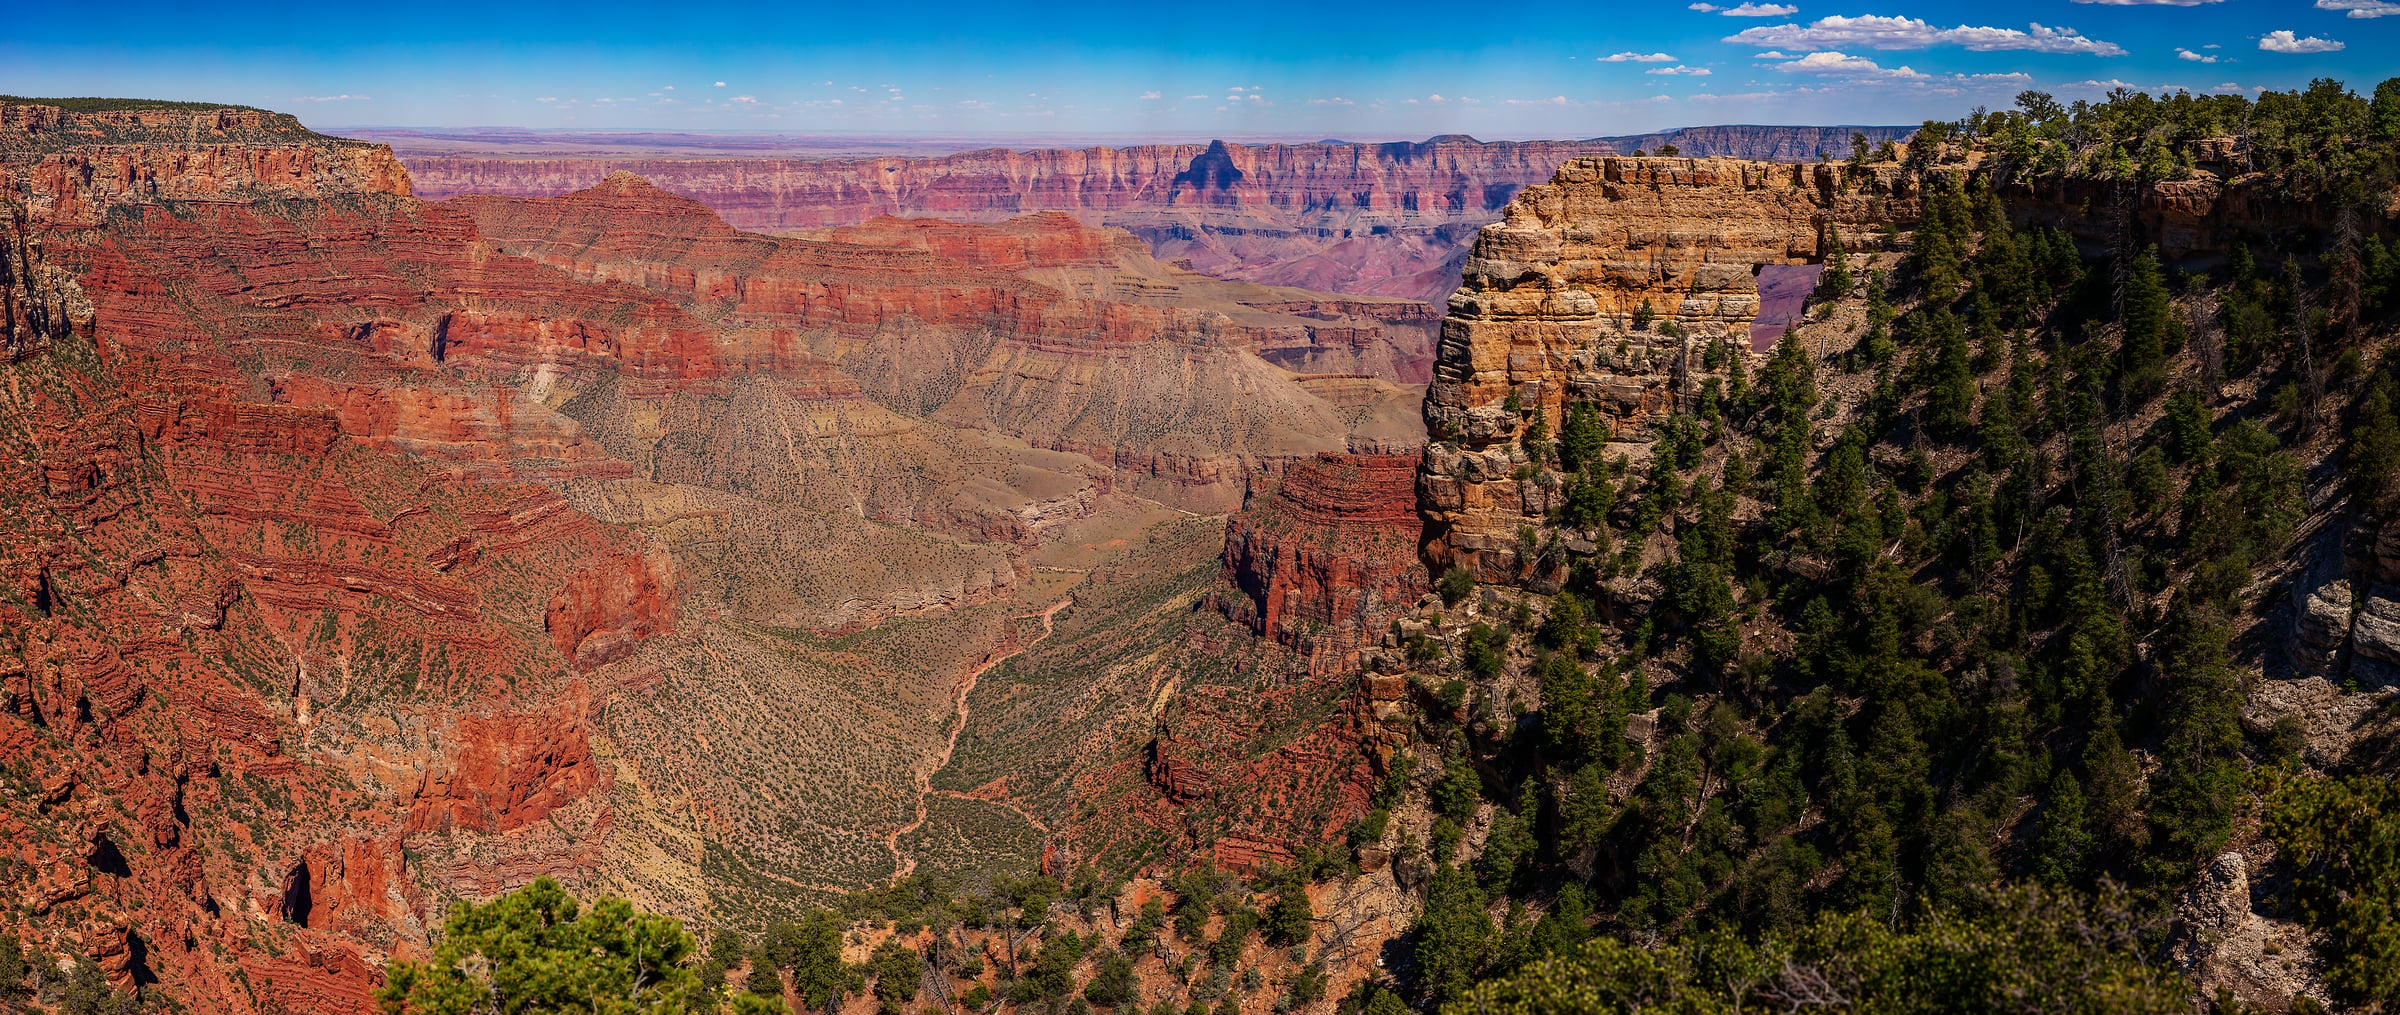 4,150 megapixels! A very high resolution, large-format VAST photo print of the Grand Canyon; landscape photograph created by John Freeman in Cape Royal, North Rim, Grand Canyon National Park, Arizona.